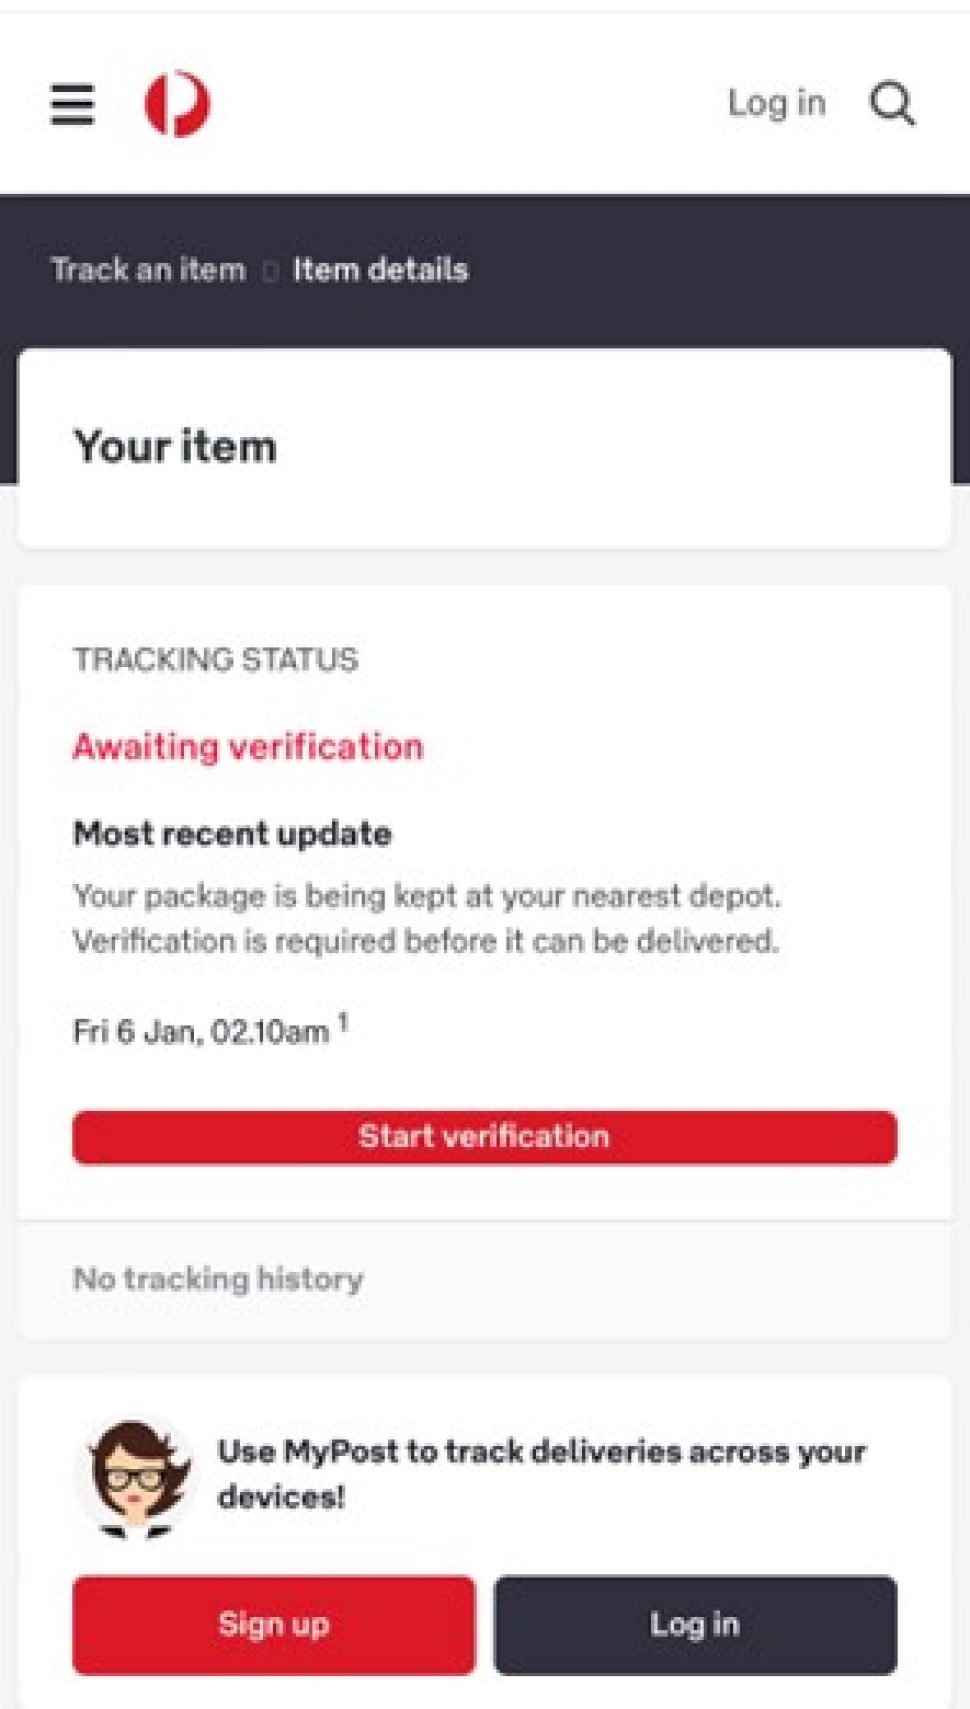 The webpage is shown with an Australia Post logo on it.
And the tracking status reads as below.
“Awaiting verification – Most recent update – Your package is being kept at your nearest depot. Verification is required before it can be delivered.”
And there is a red button shows “Start verification”.